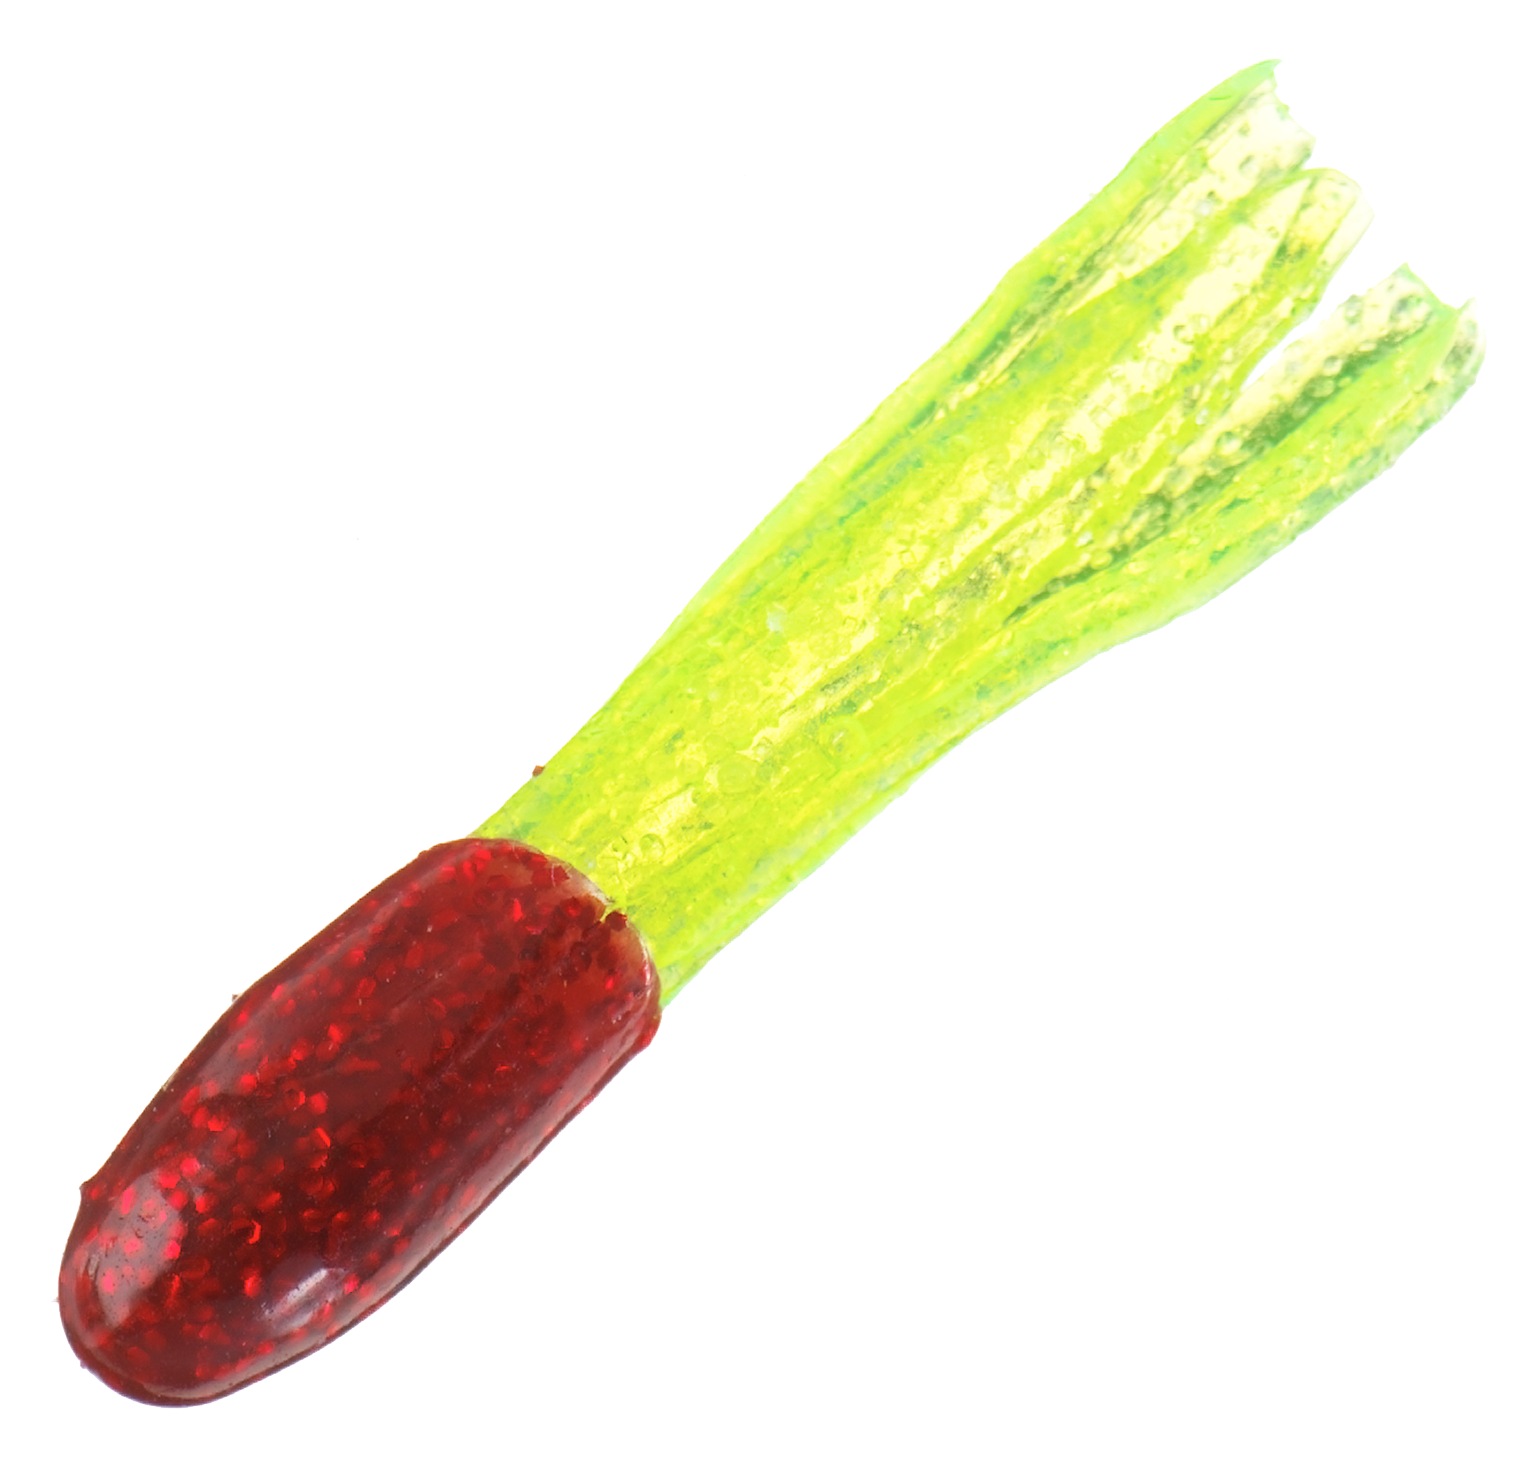 Bass Pro Shops Sparkle Squirts - 1-1/2"" - 15 pack - Electric Red/Chartreuse